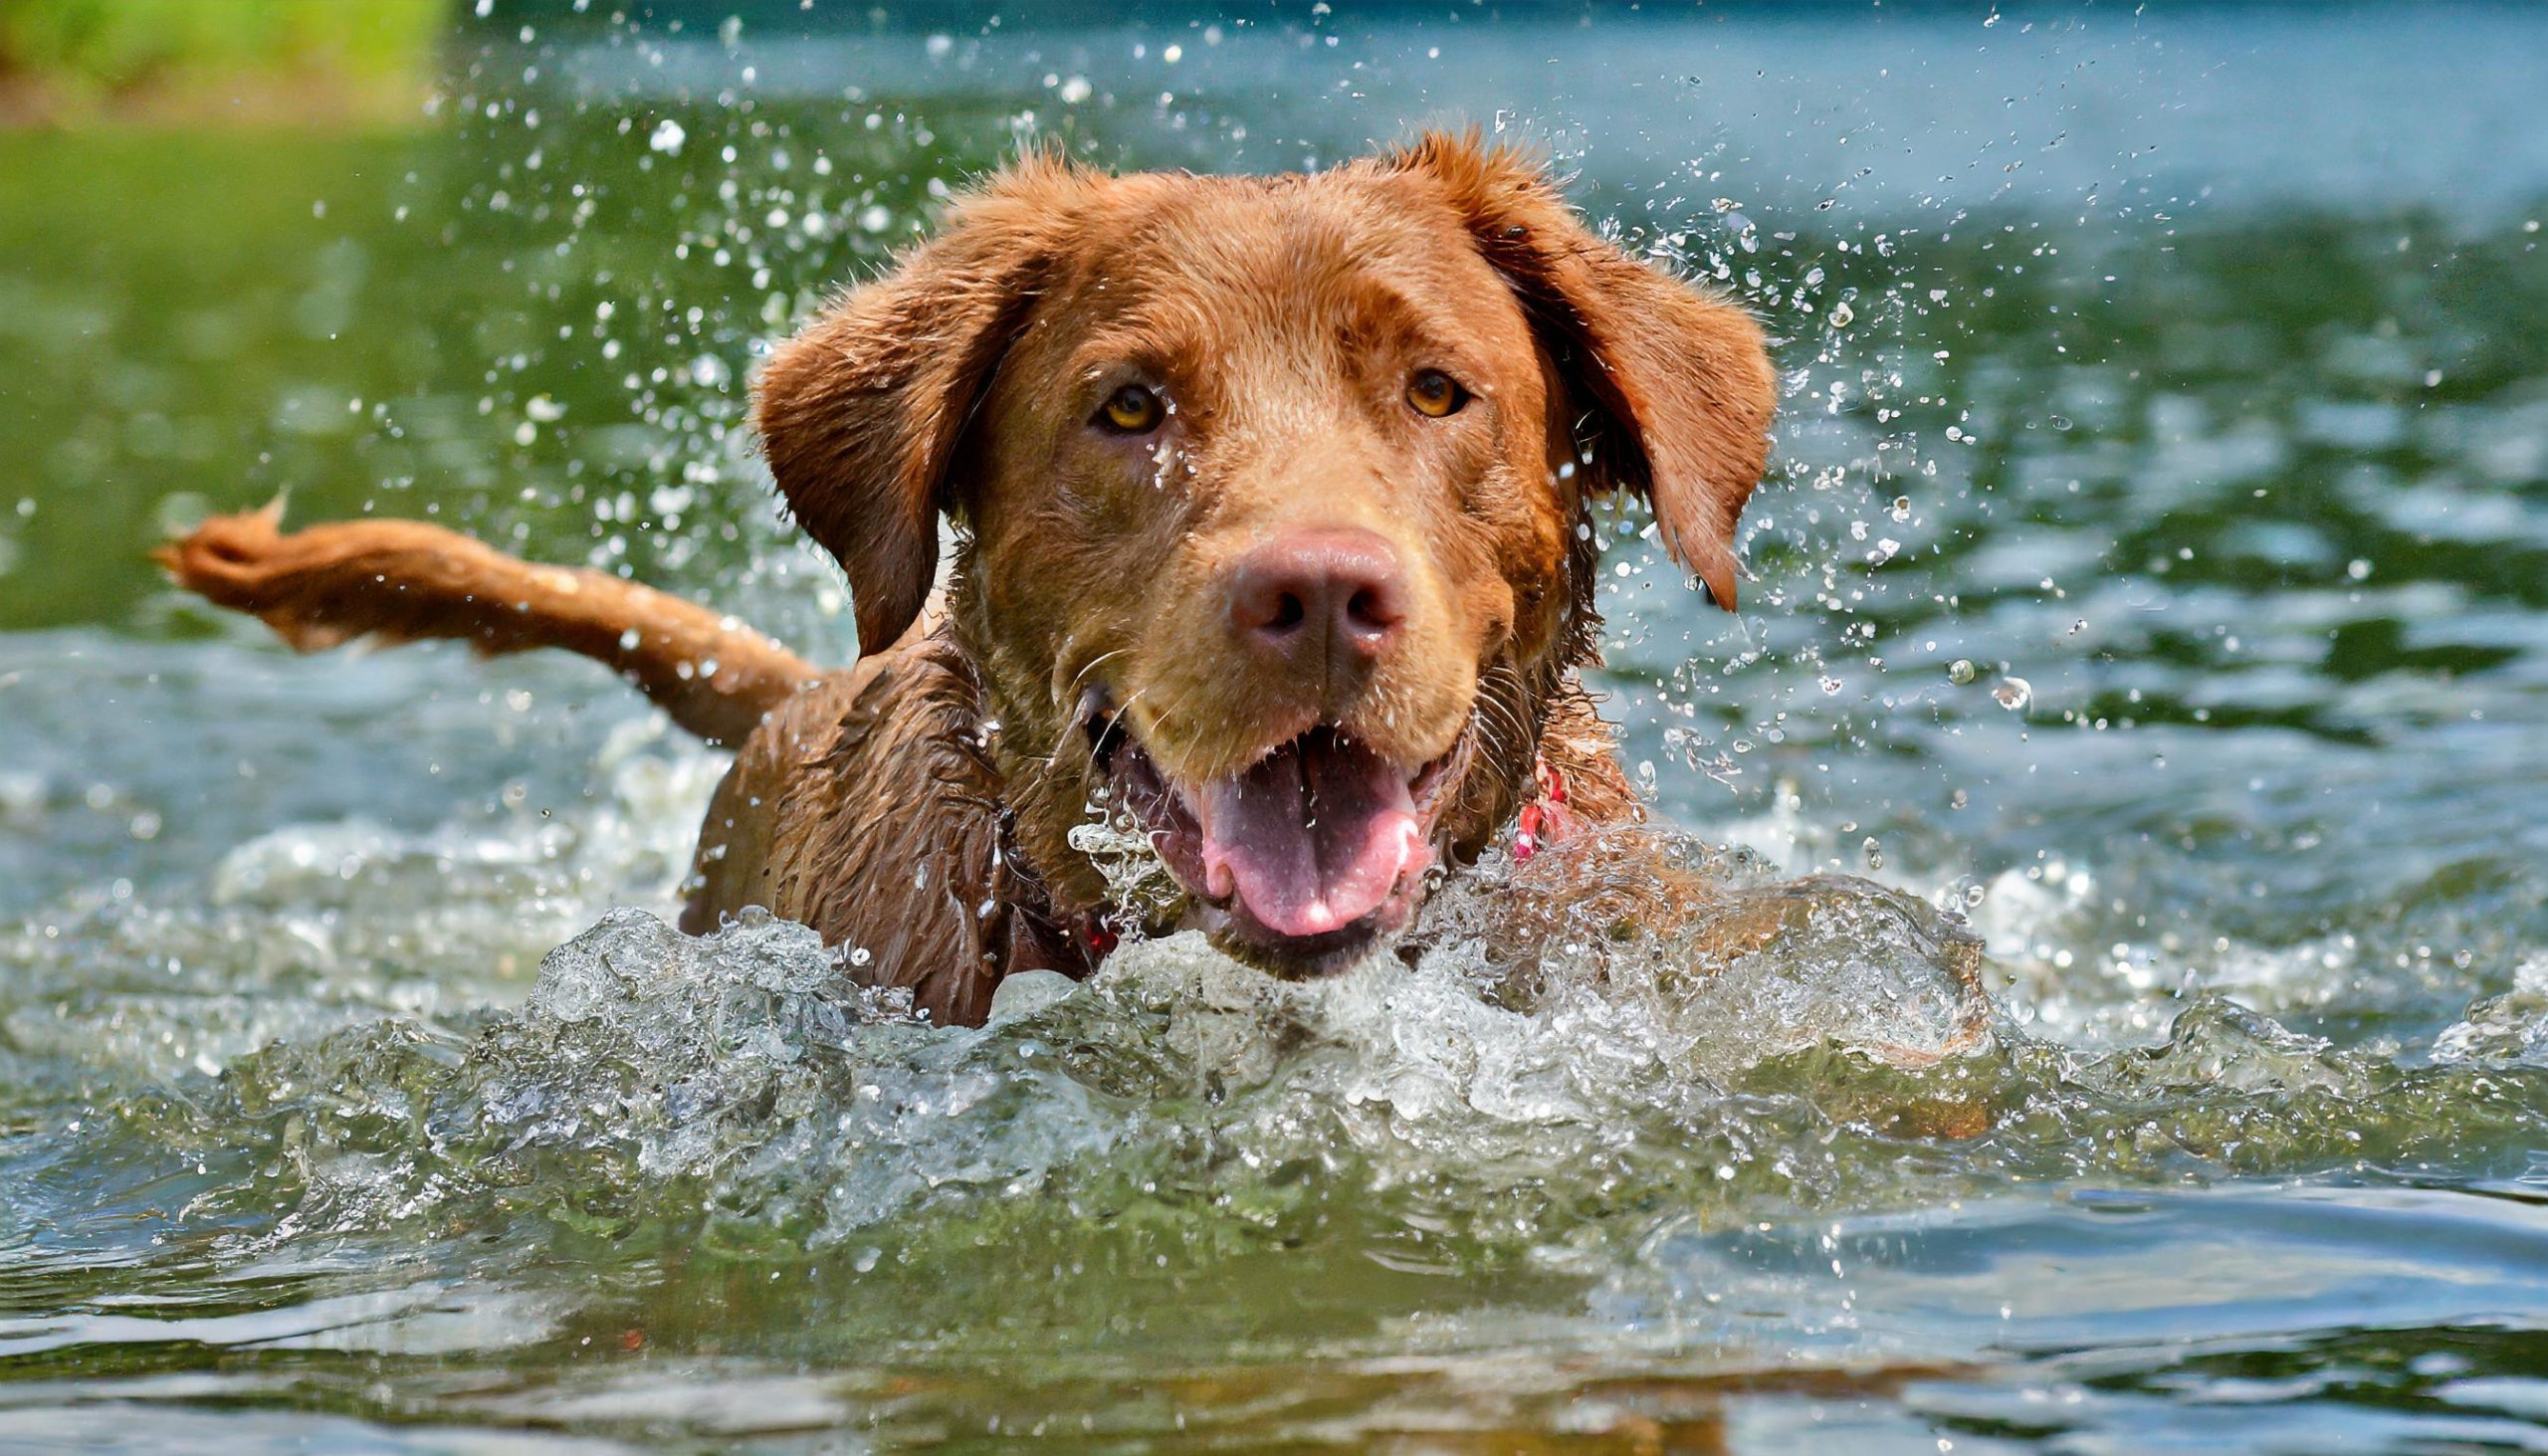 Chesapeak bay retriever doing what he loves most, that is swimming, which is a great way for these dogs to exercise